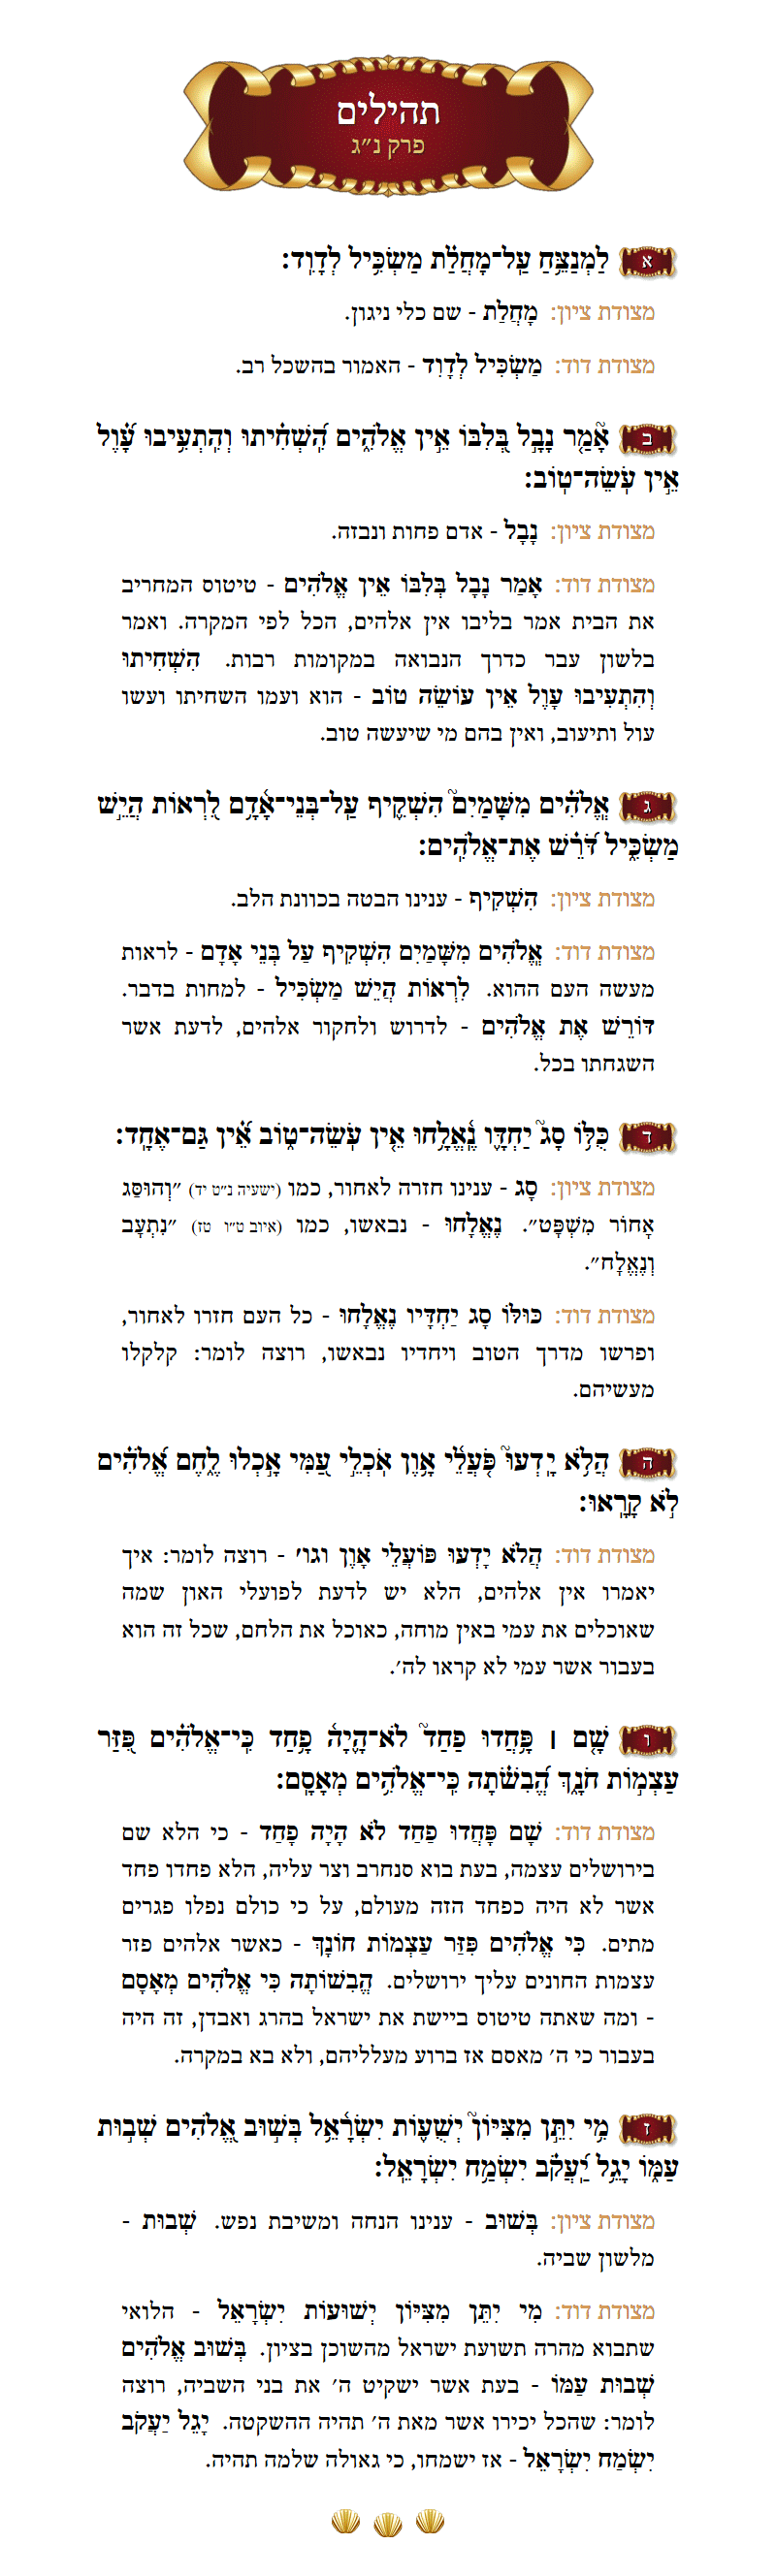 Sefer Tehillim Chapter 35 with commentary